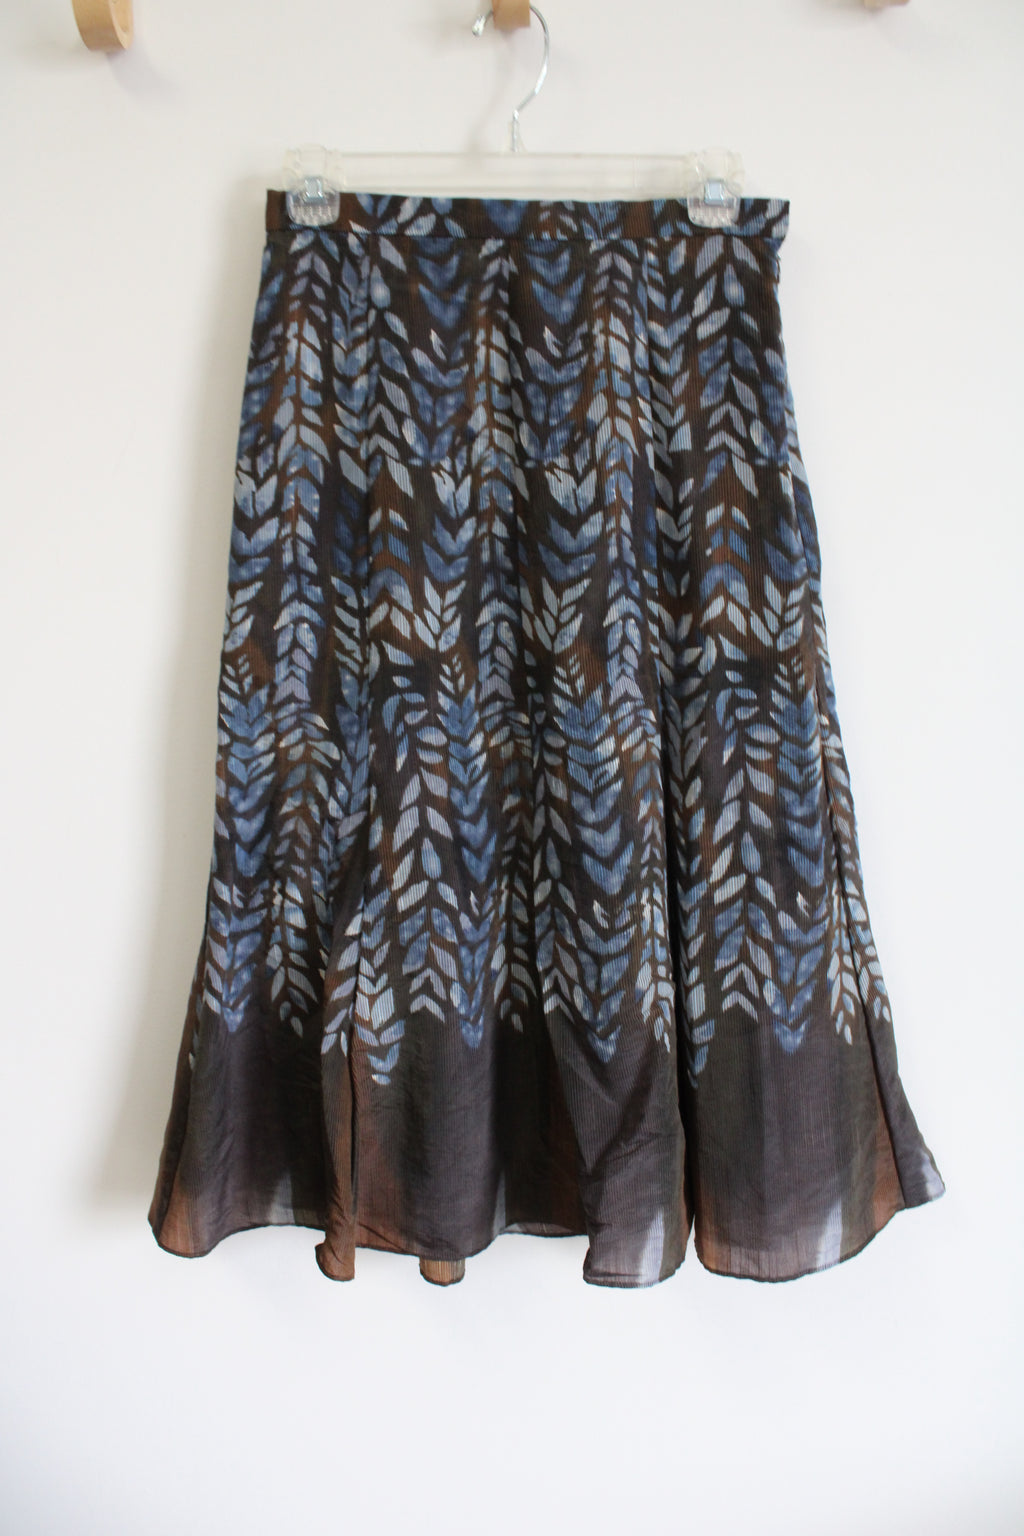 Coldwater Creek Brown & Blue Patterned Textured Flare Skirt | XS Petite (4)